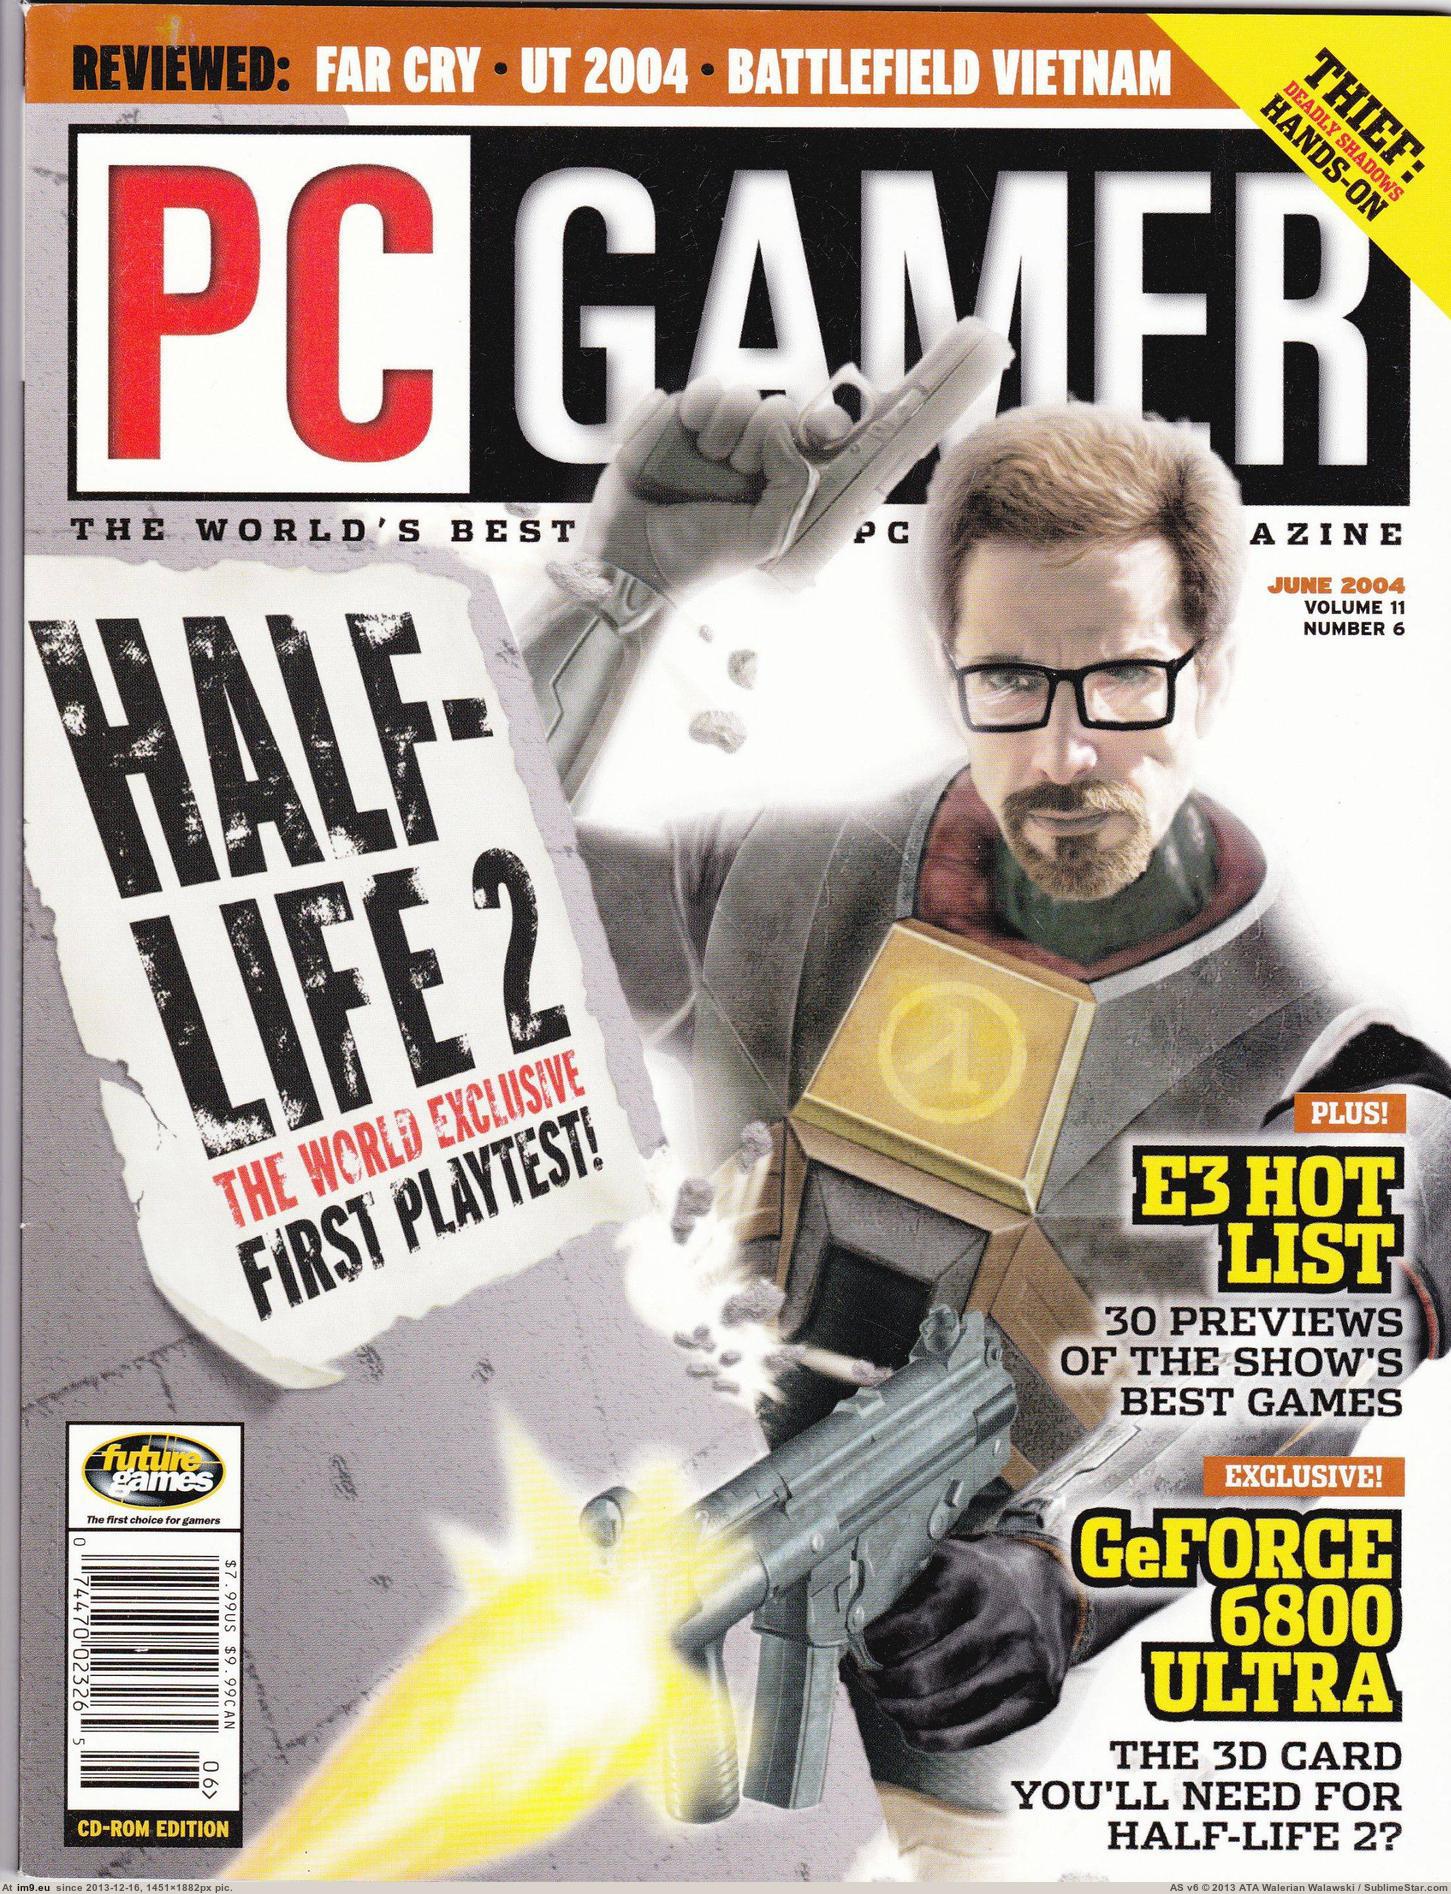 [Gaming] Half-Life 2 - First Look (Old PC Gamer Scan) 1 (in My r/GAMING favs)